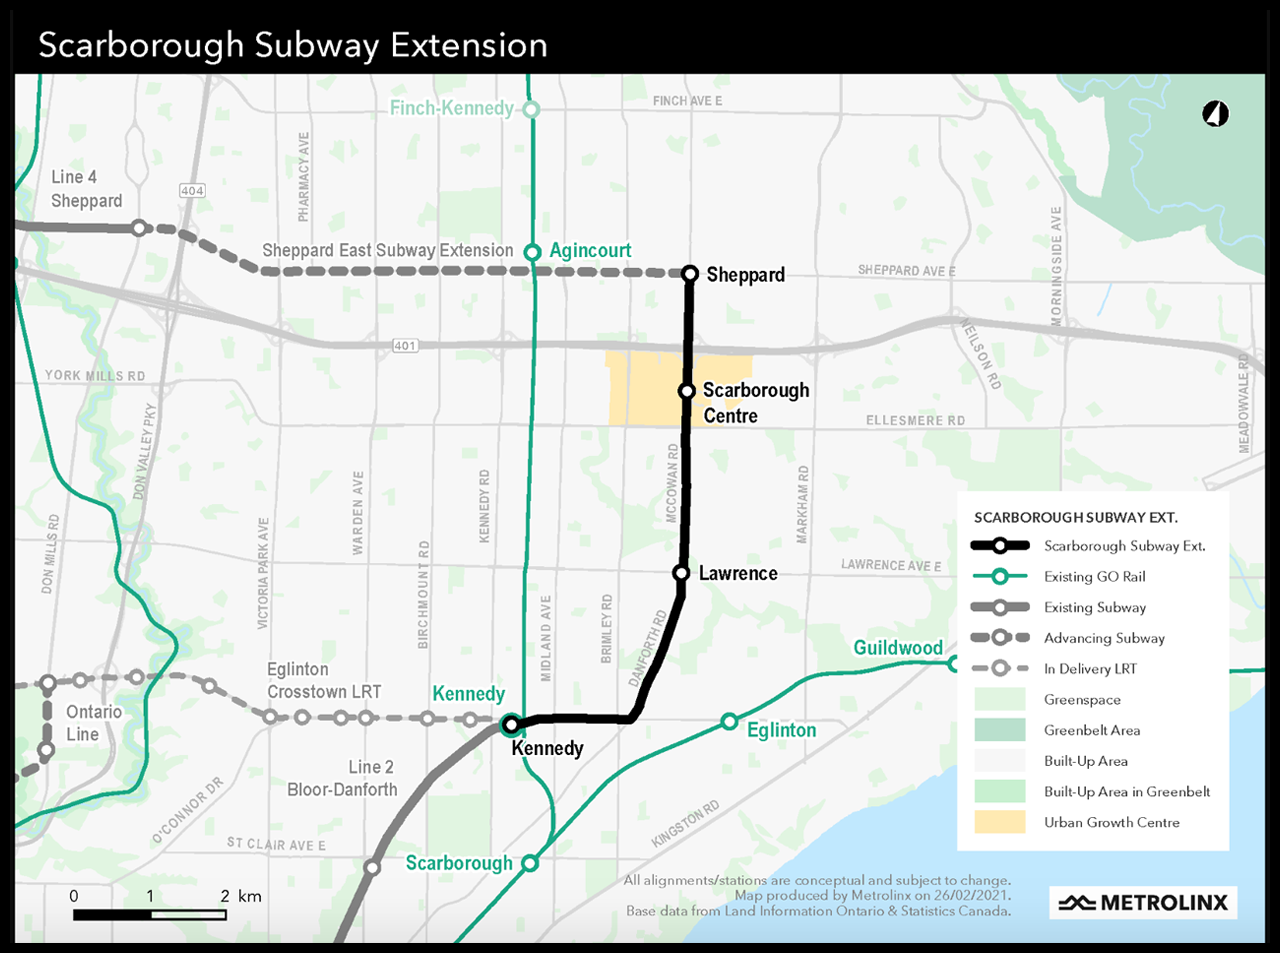 The Scarborough Subway Extension project will bring Toronto Transit Commission’s Line 2 subway 4.8 miles (7.8 kilometers) further into Scarborough, with stations at Lawrence Avenue and McCowan Road; Scarborough Center; and Sheppard Avenue and McCowan Road.